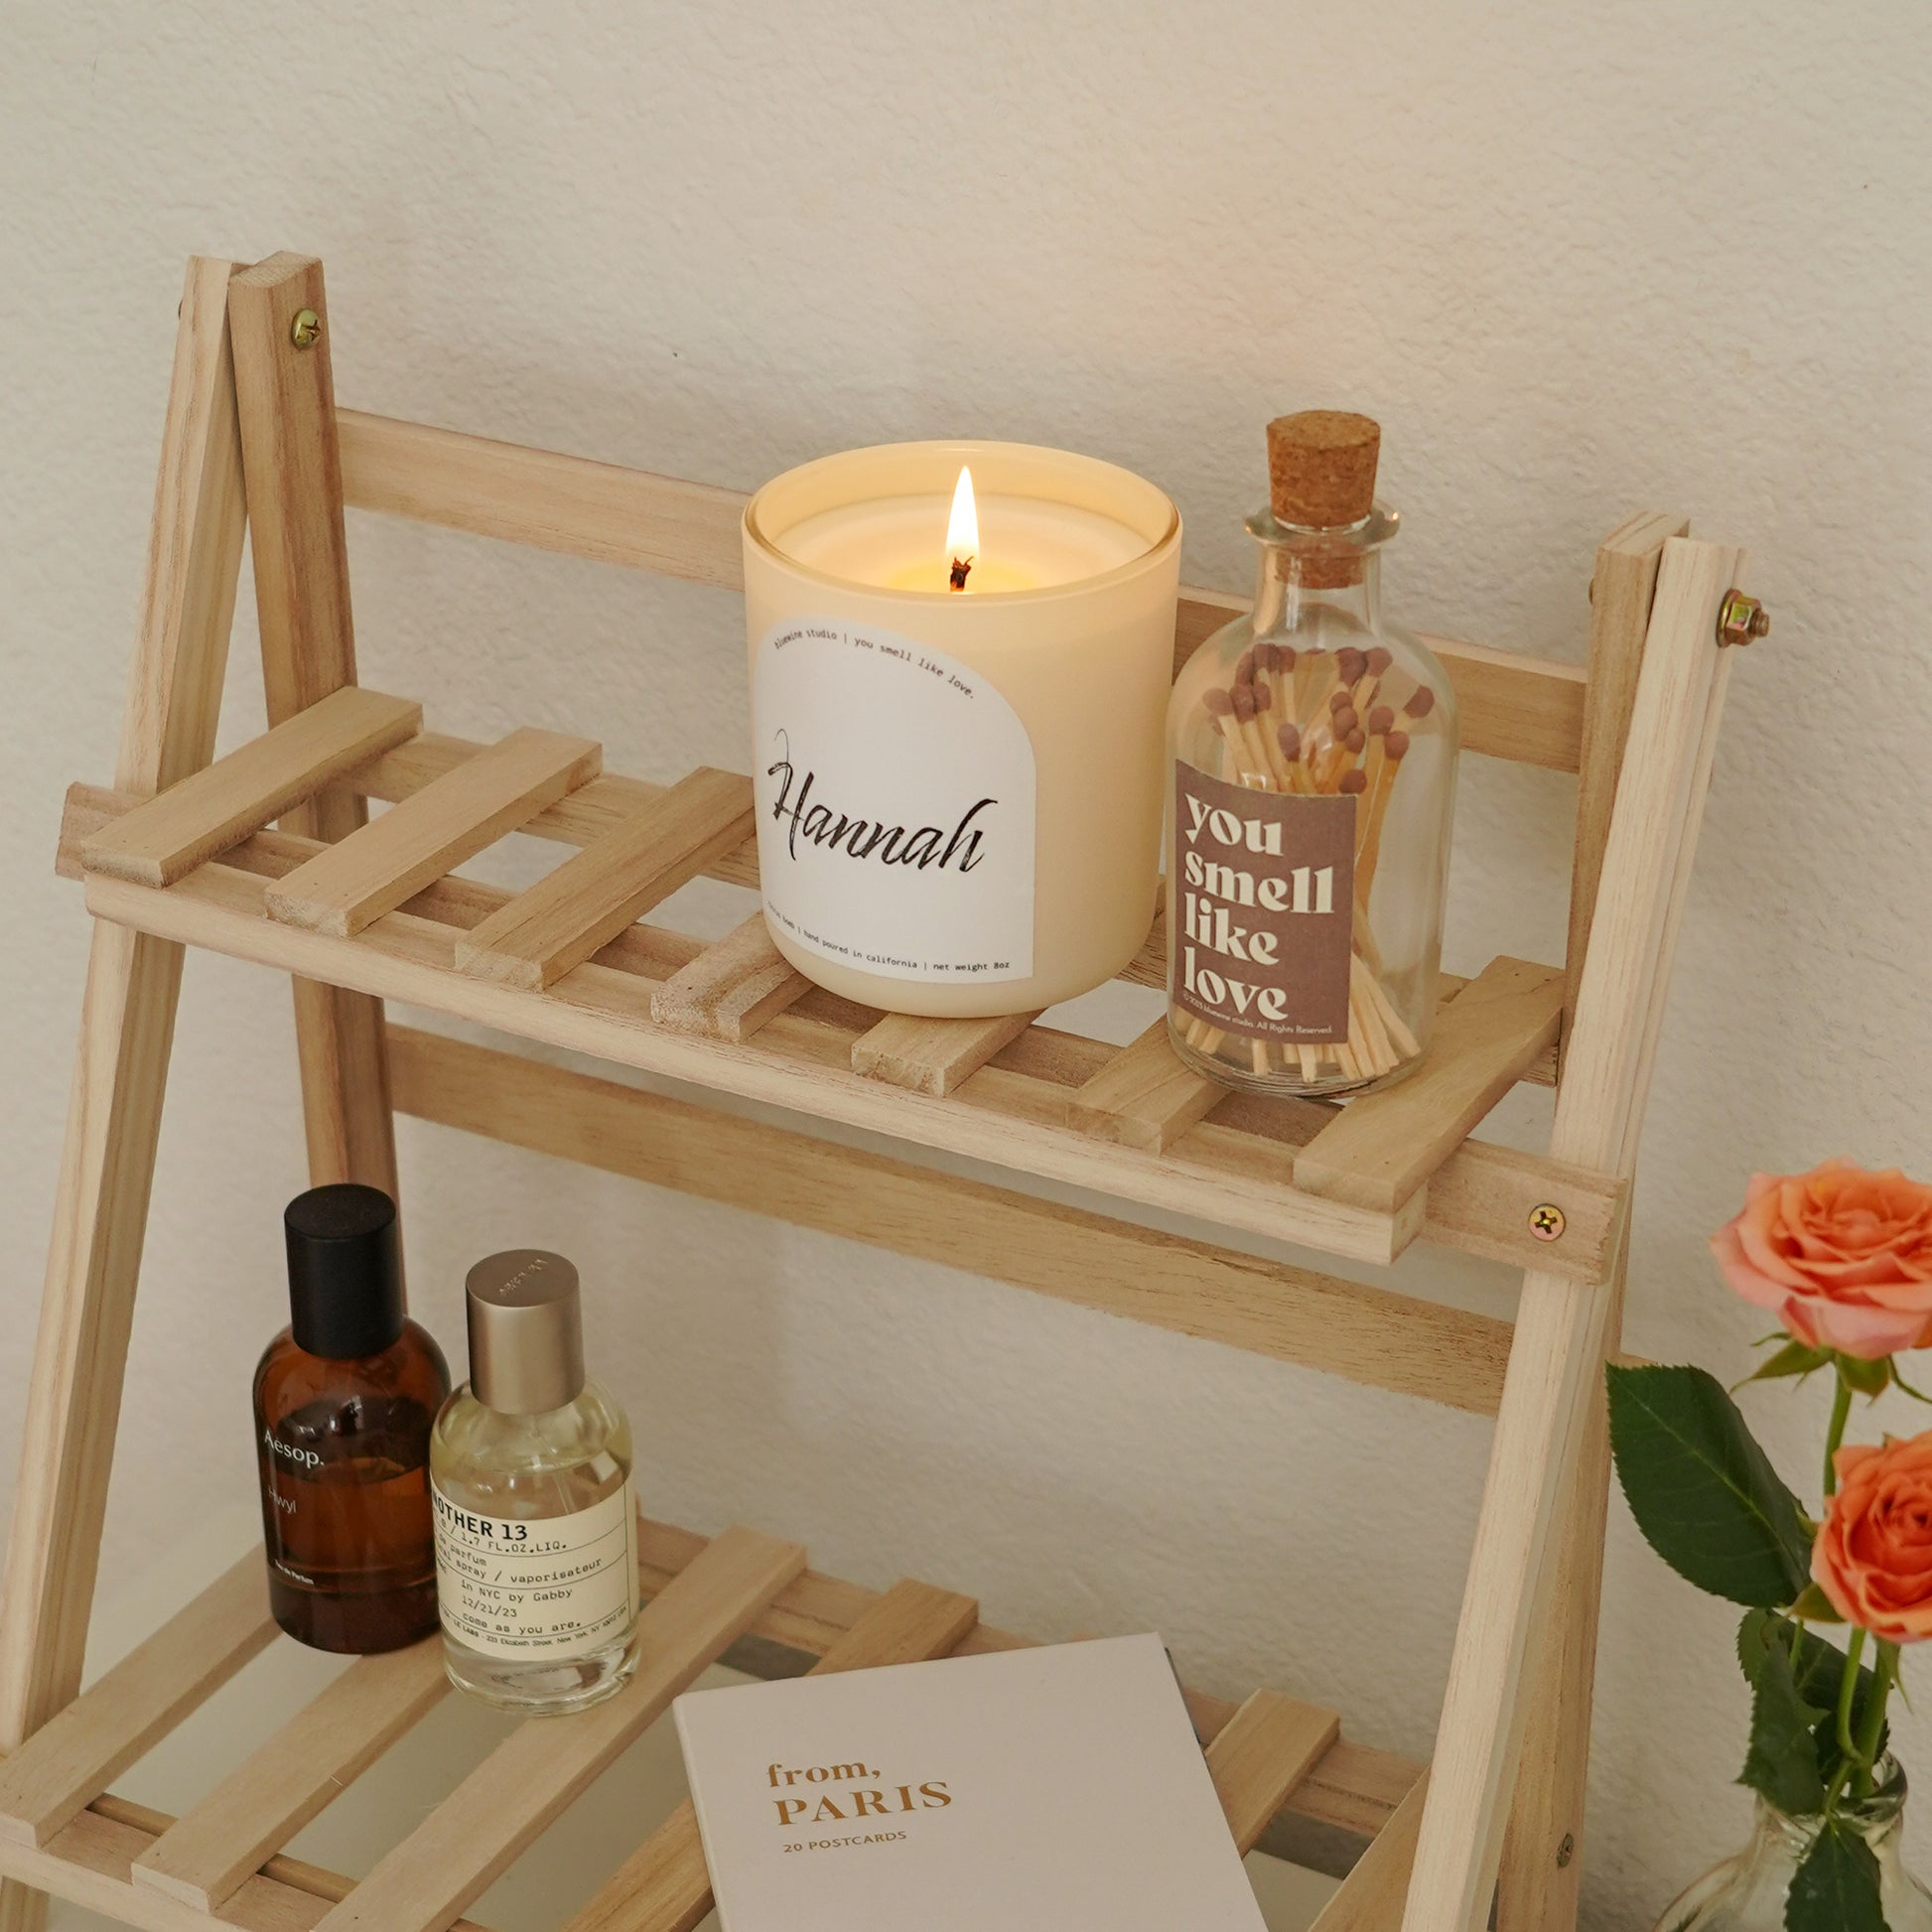 a lit personalized name candle and a match bottle with a brown label placed on a wooden organizer